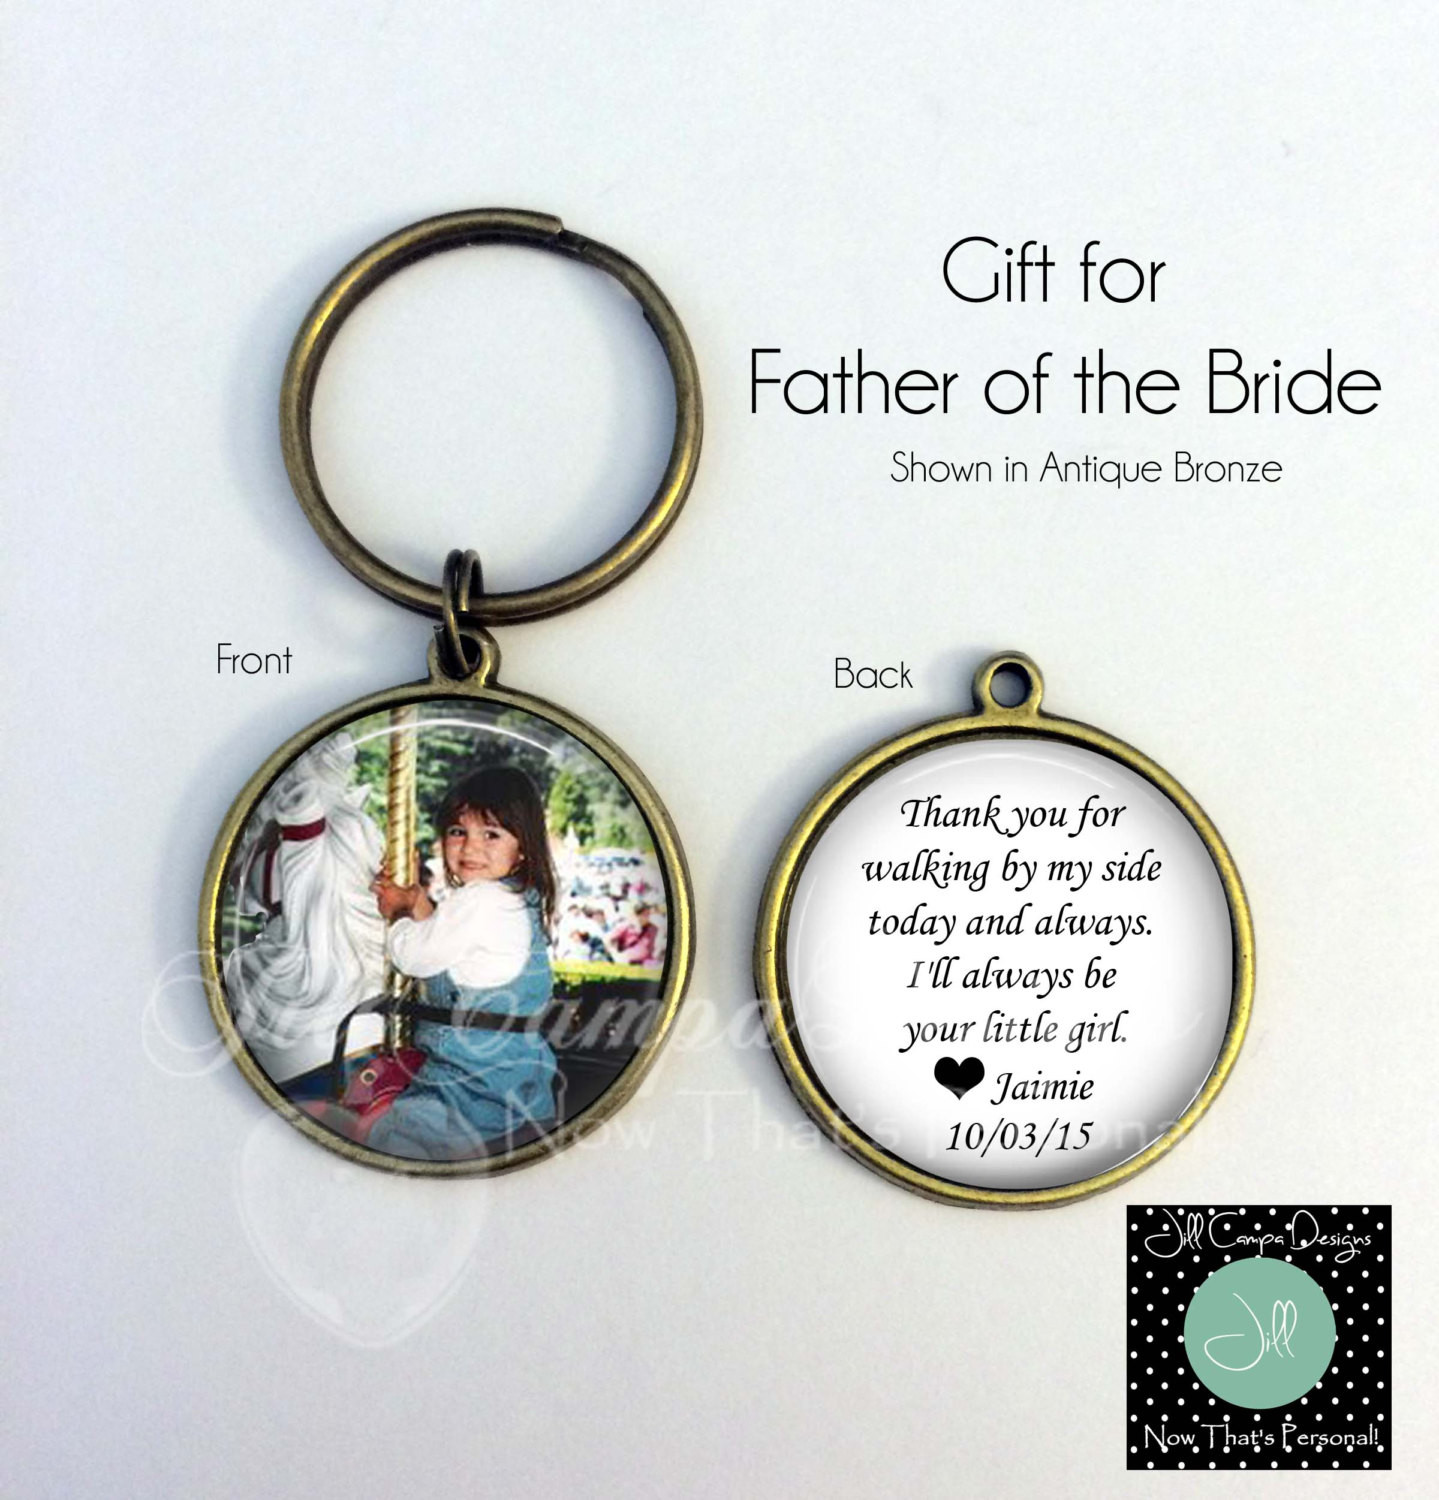 Father Of The Bride Gift Ideas
 FATHER of the BRIDE GIFT Stepfather of the Bride t